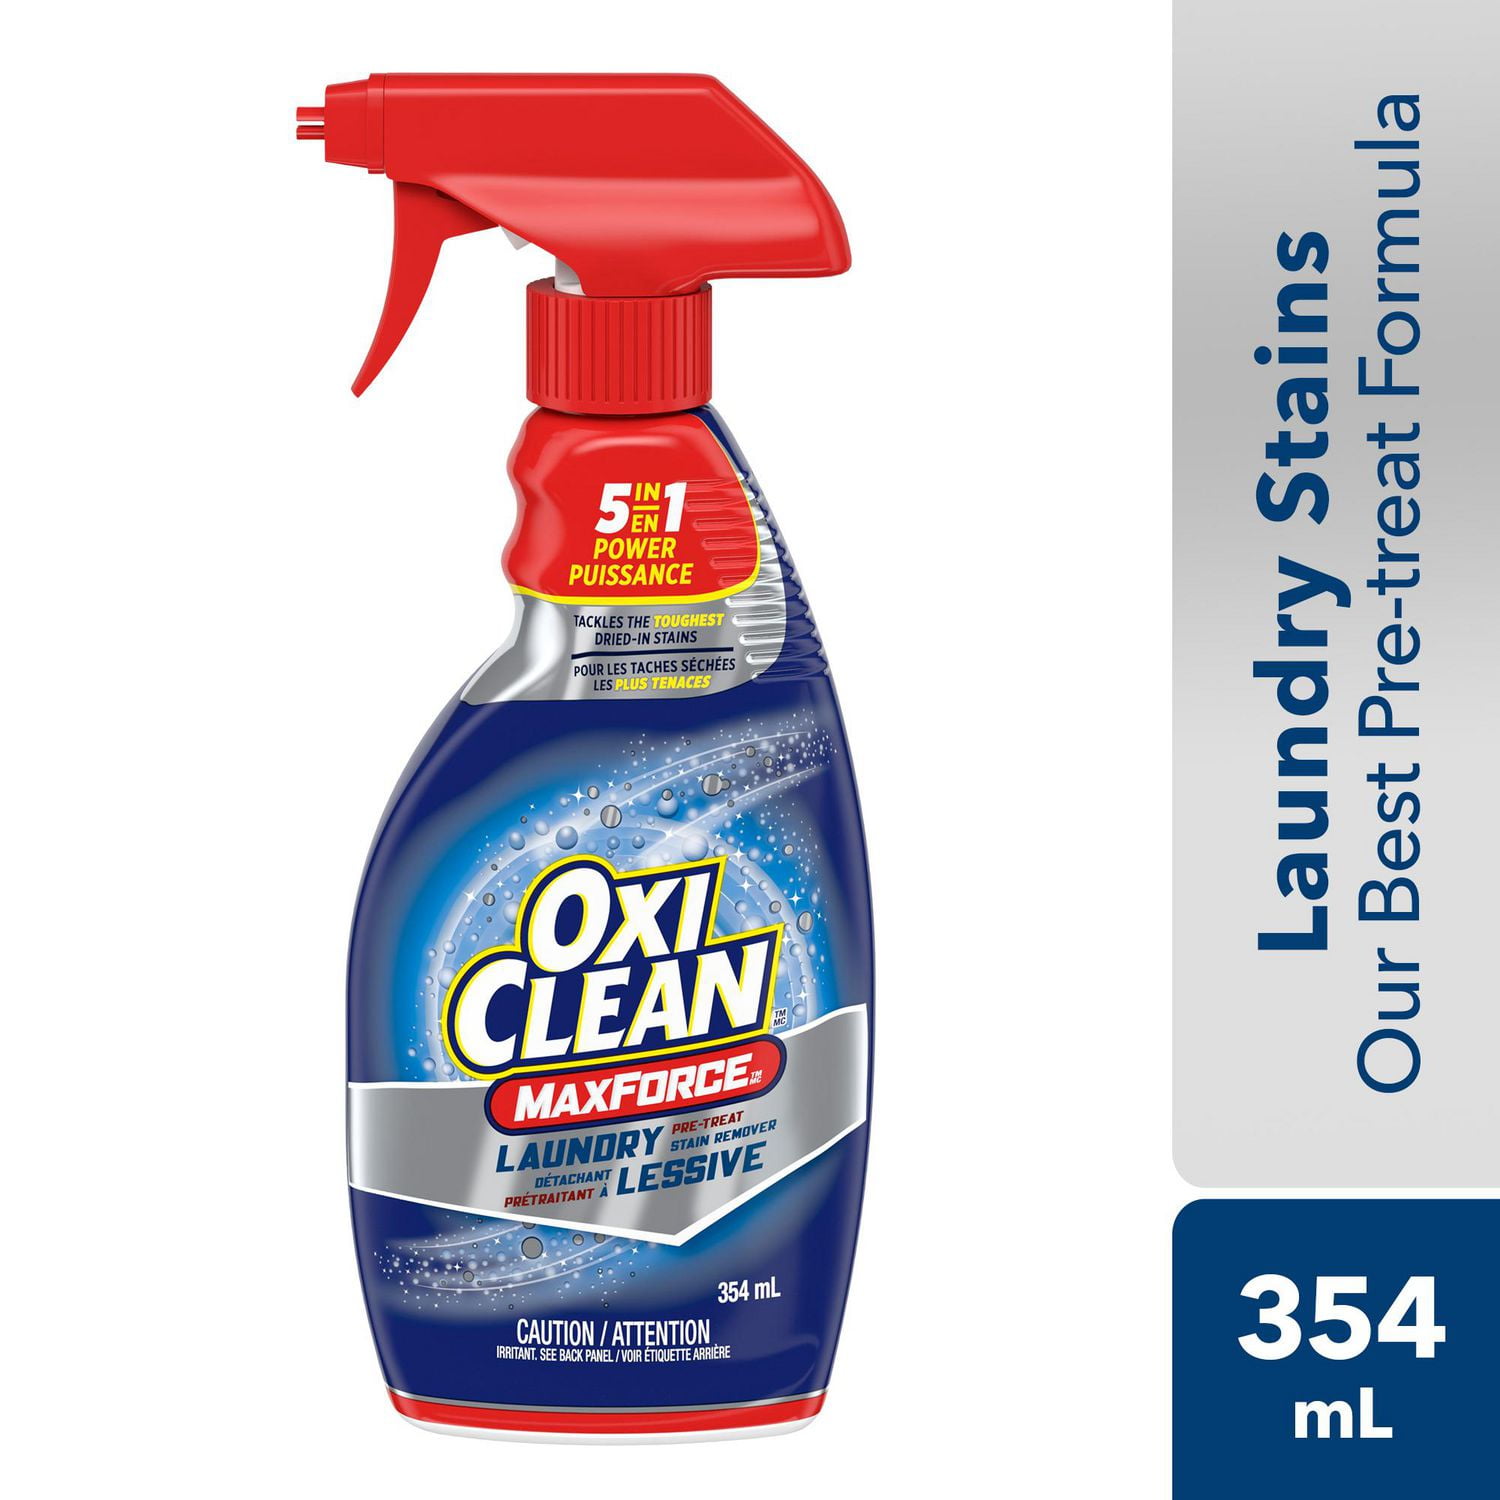 OxiClean Laundry Stain Remover Spray, Chlorine Bleach-Free, 650 mL